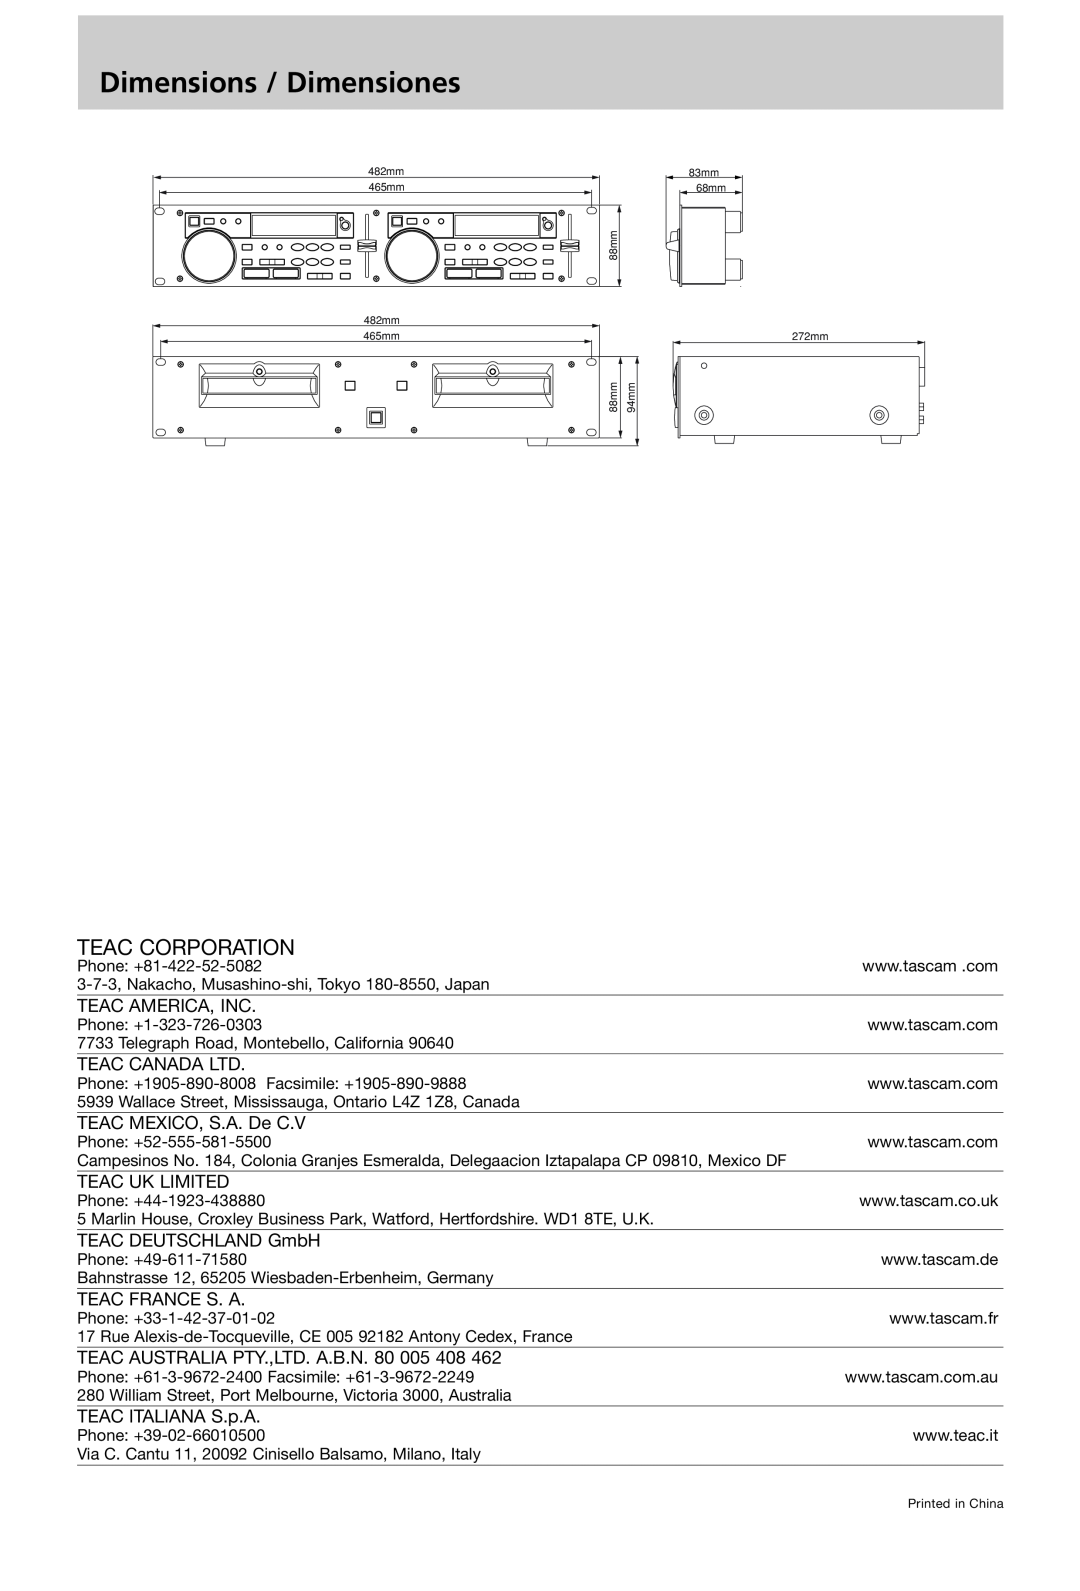 Tascam CD-X1500 owner manual Dimensions / Dimensiones, Teac Corporation 